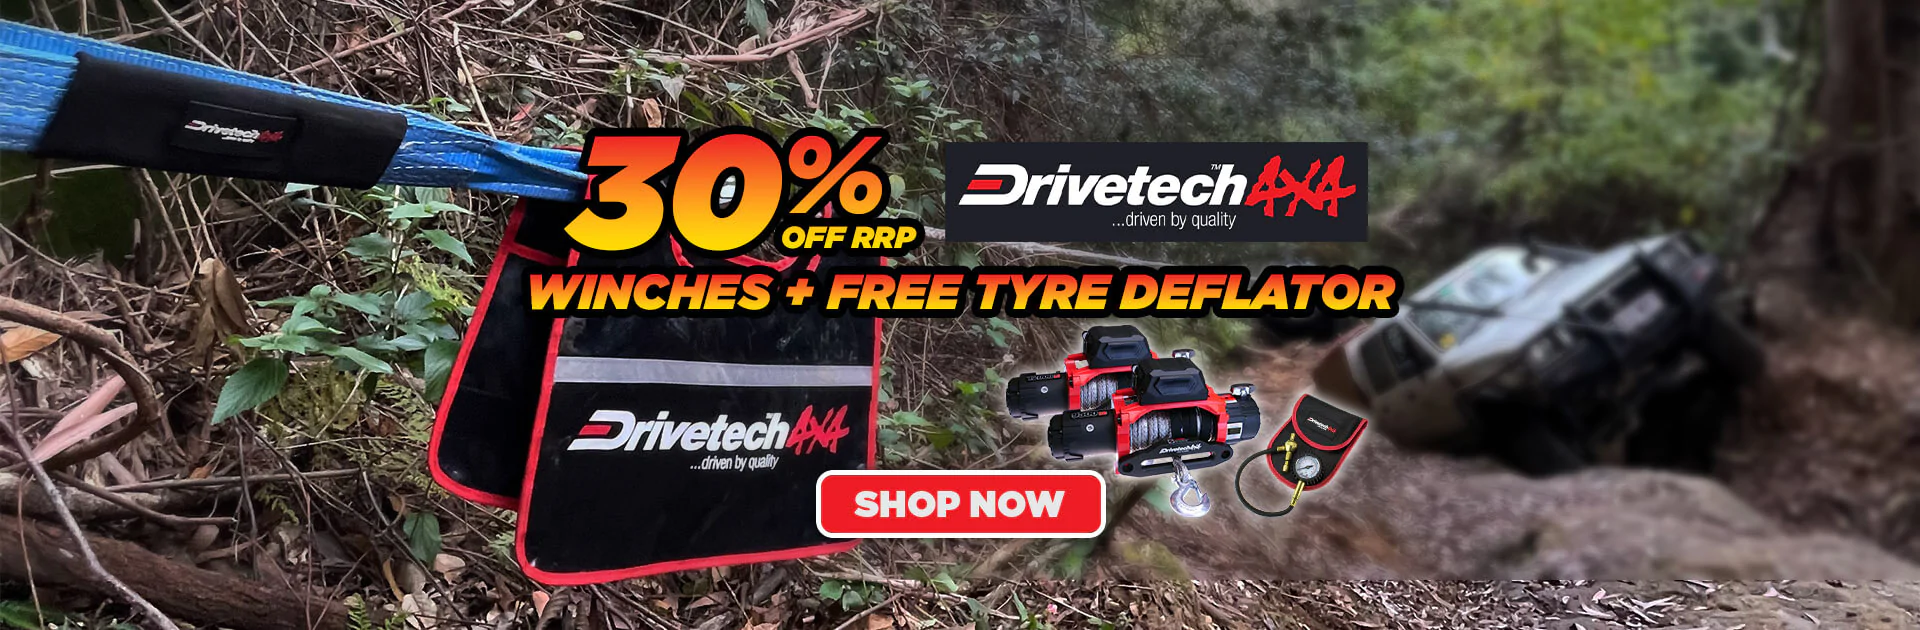 30% OFF RRP Winches +  Free Tyre Deflator at 4wd247